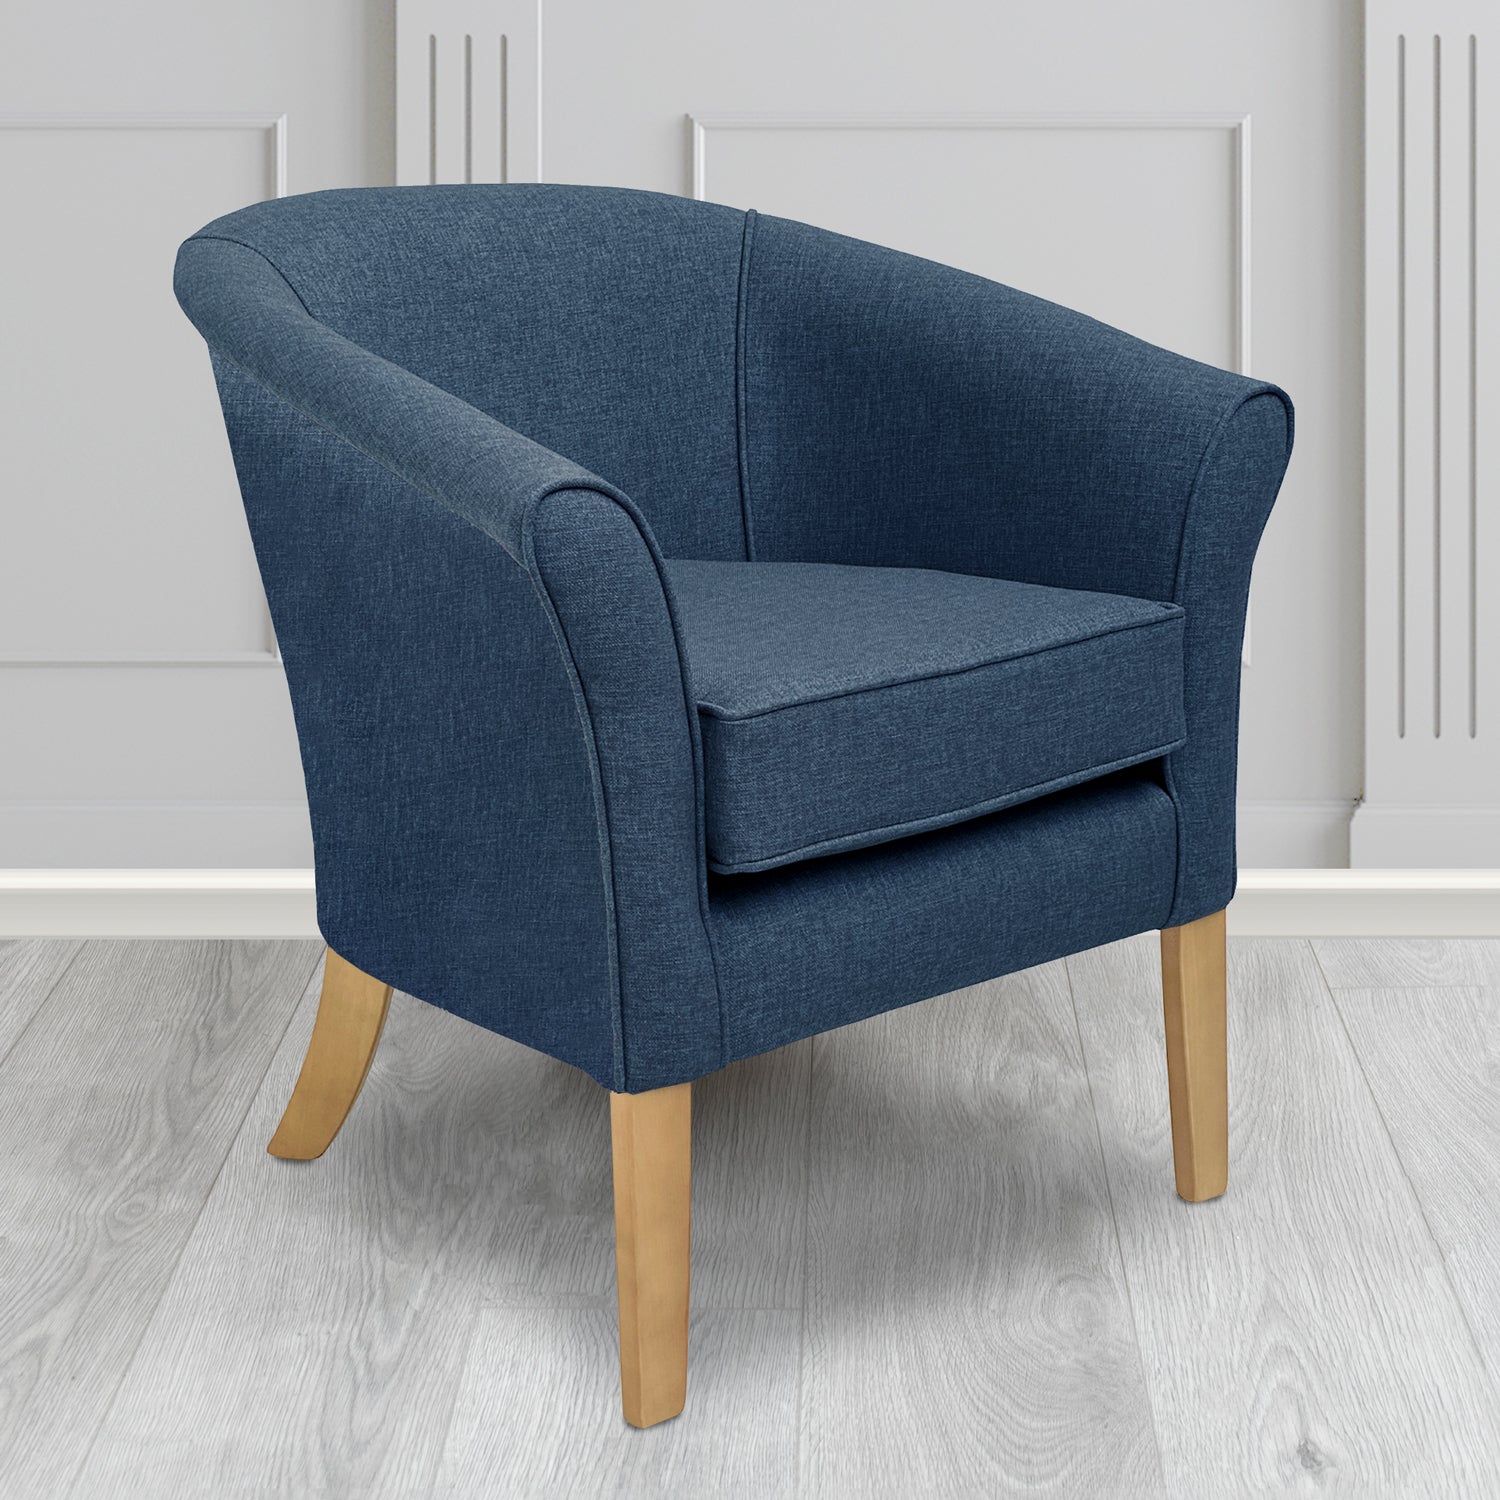 Aspen Tub Chair in Marna 105 Indigo Crib 5 Fabric - Antimicrobial, Stain Resistant & Waterproof - The Tub Chair Shop